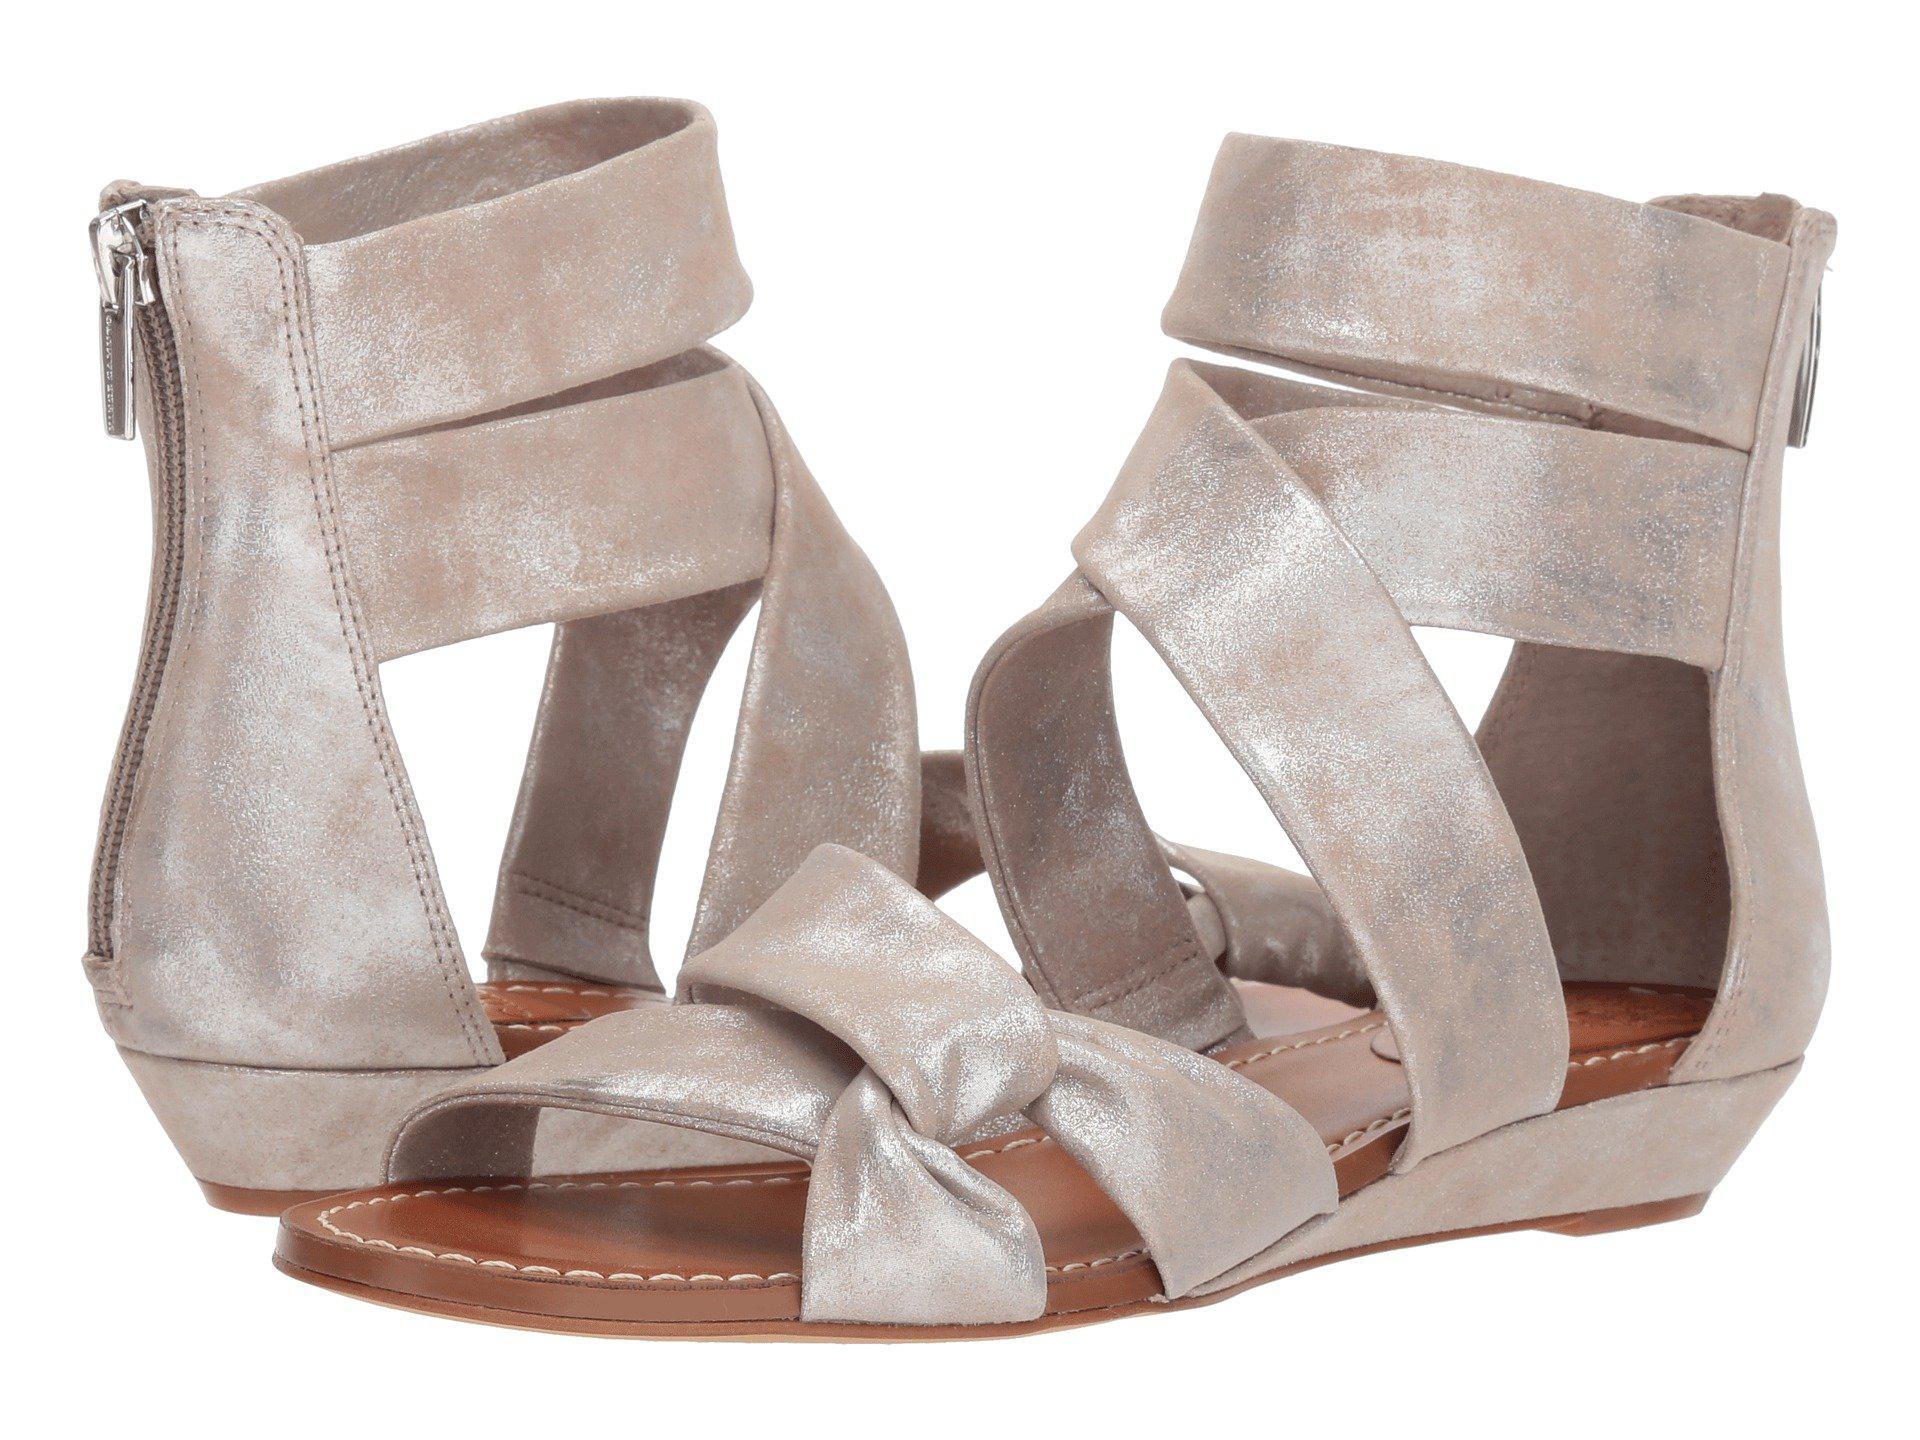 vince camuto seevina sandals